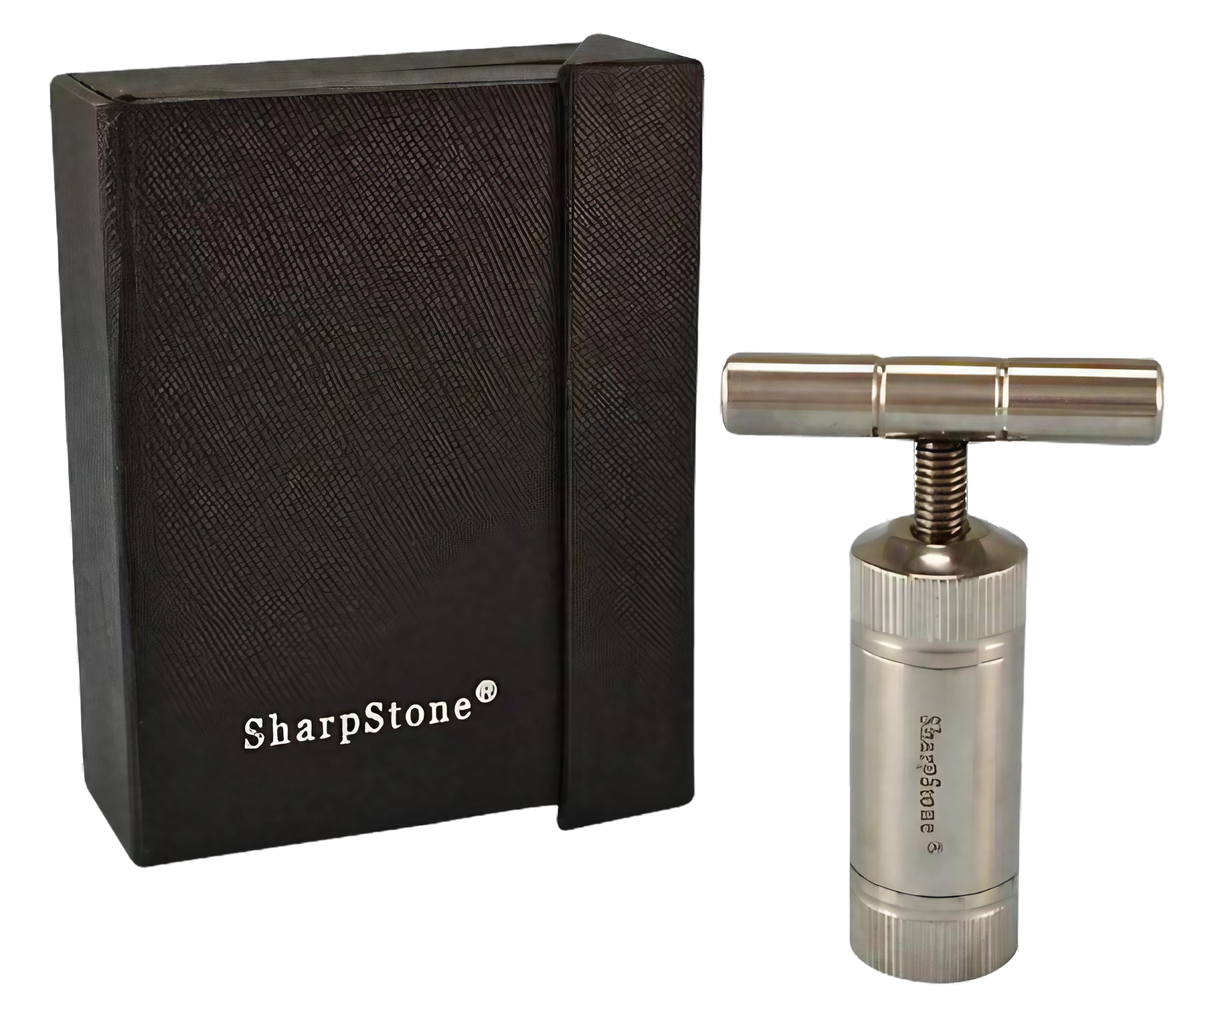 Sharpstone Silver T-Style Press with Case, Portable Aluminum Herb Compressor - Side View